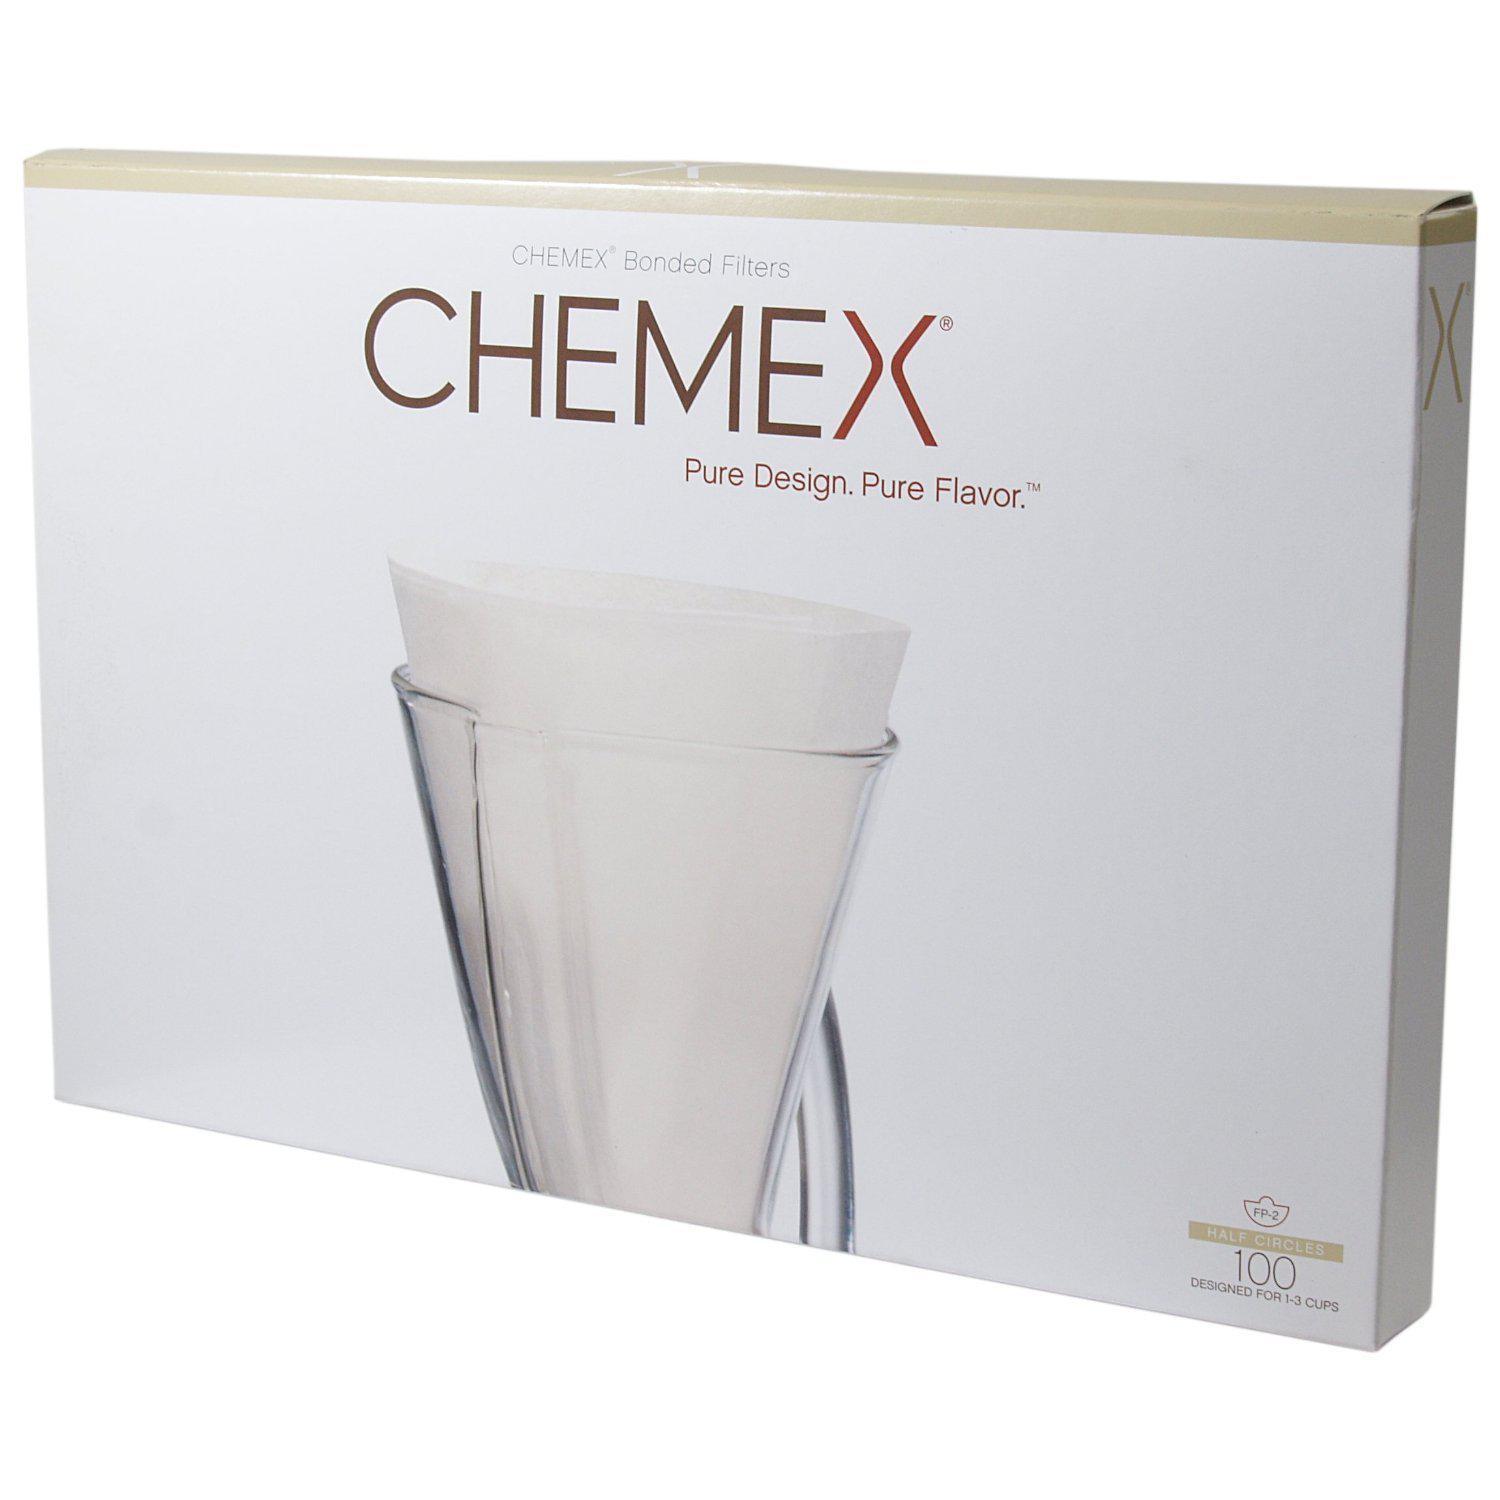 Chemex Coffee Filter Papers for 1 Cup (100)